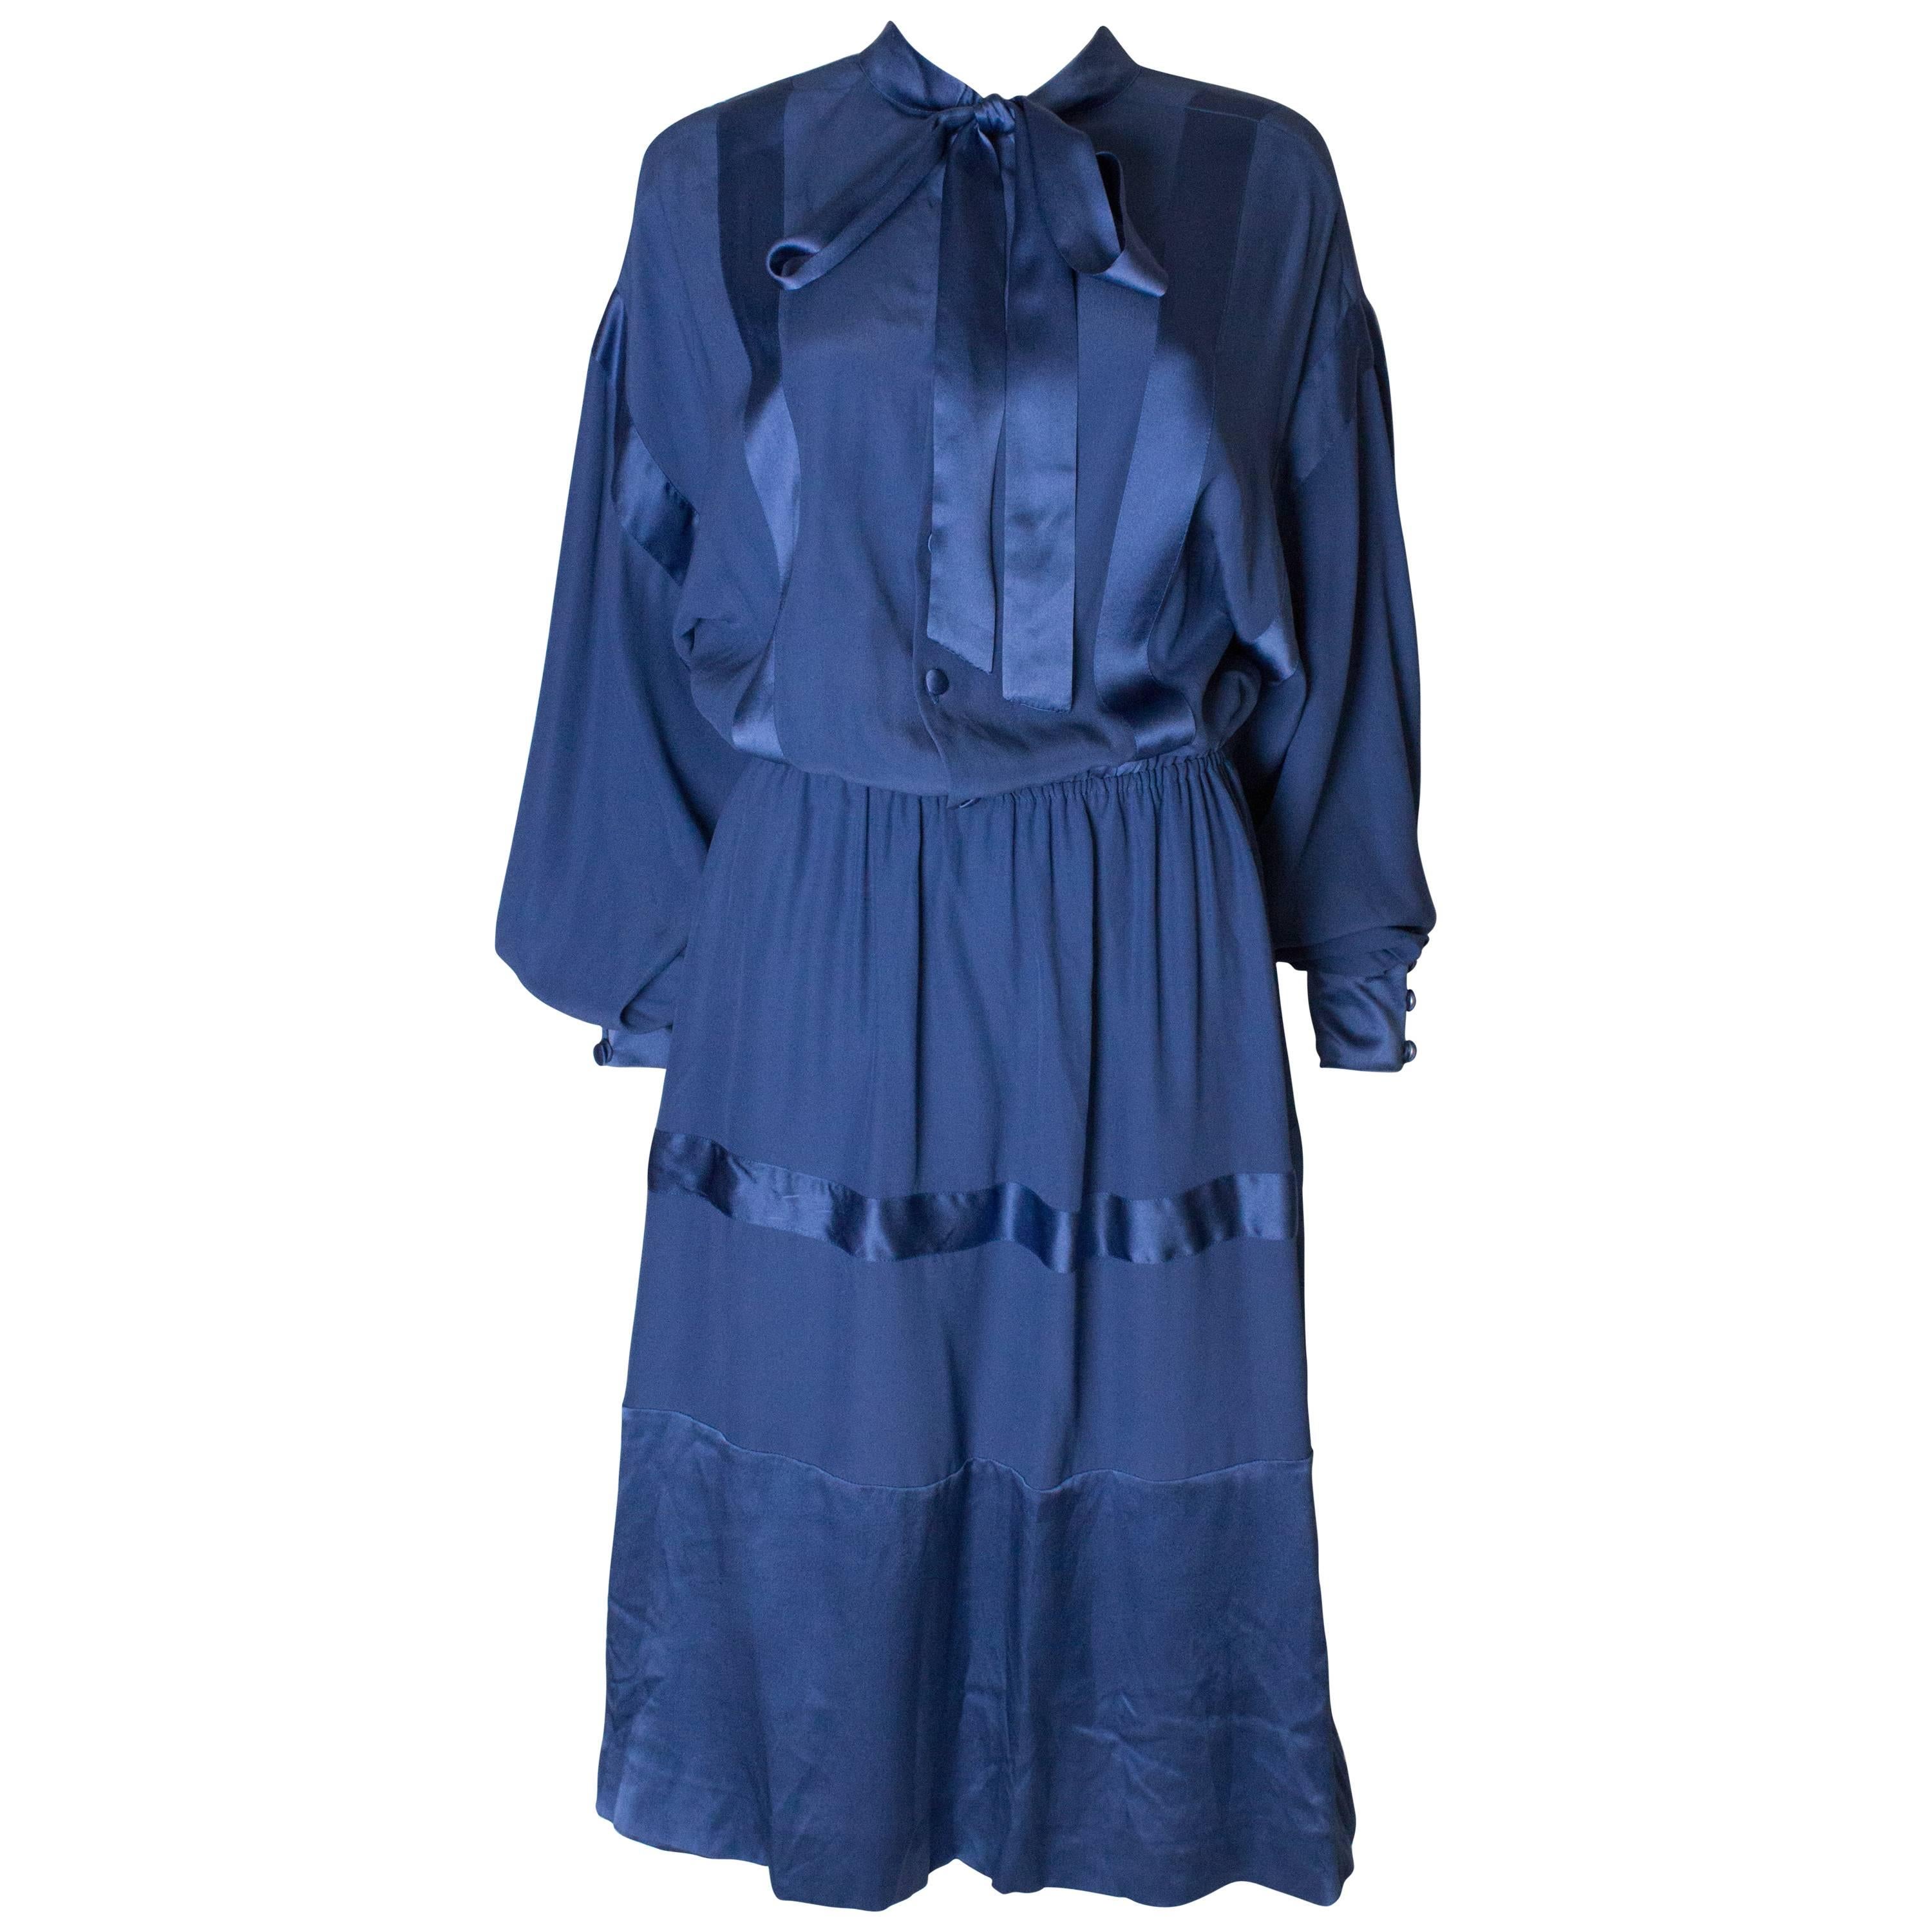 A Vintage 1970s  blue Silk Dress by Stefano Ricci for Herbie Frogg For Sale